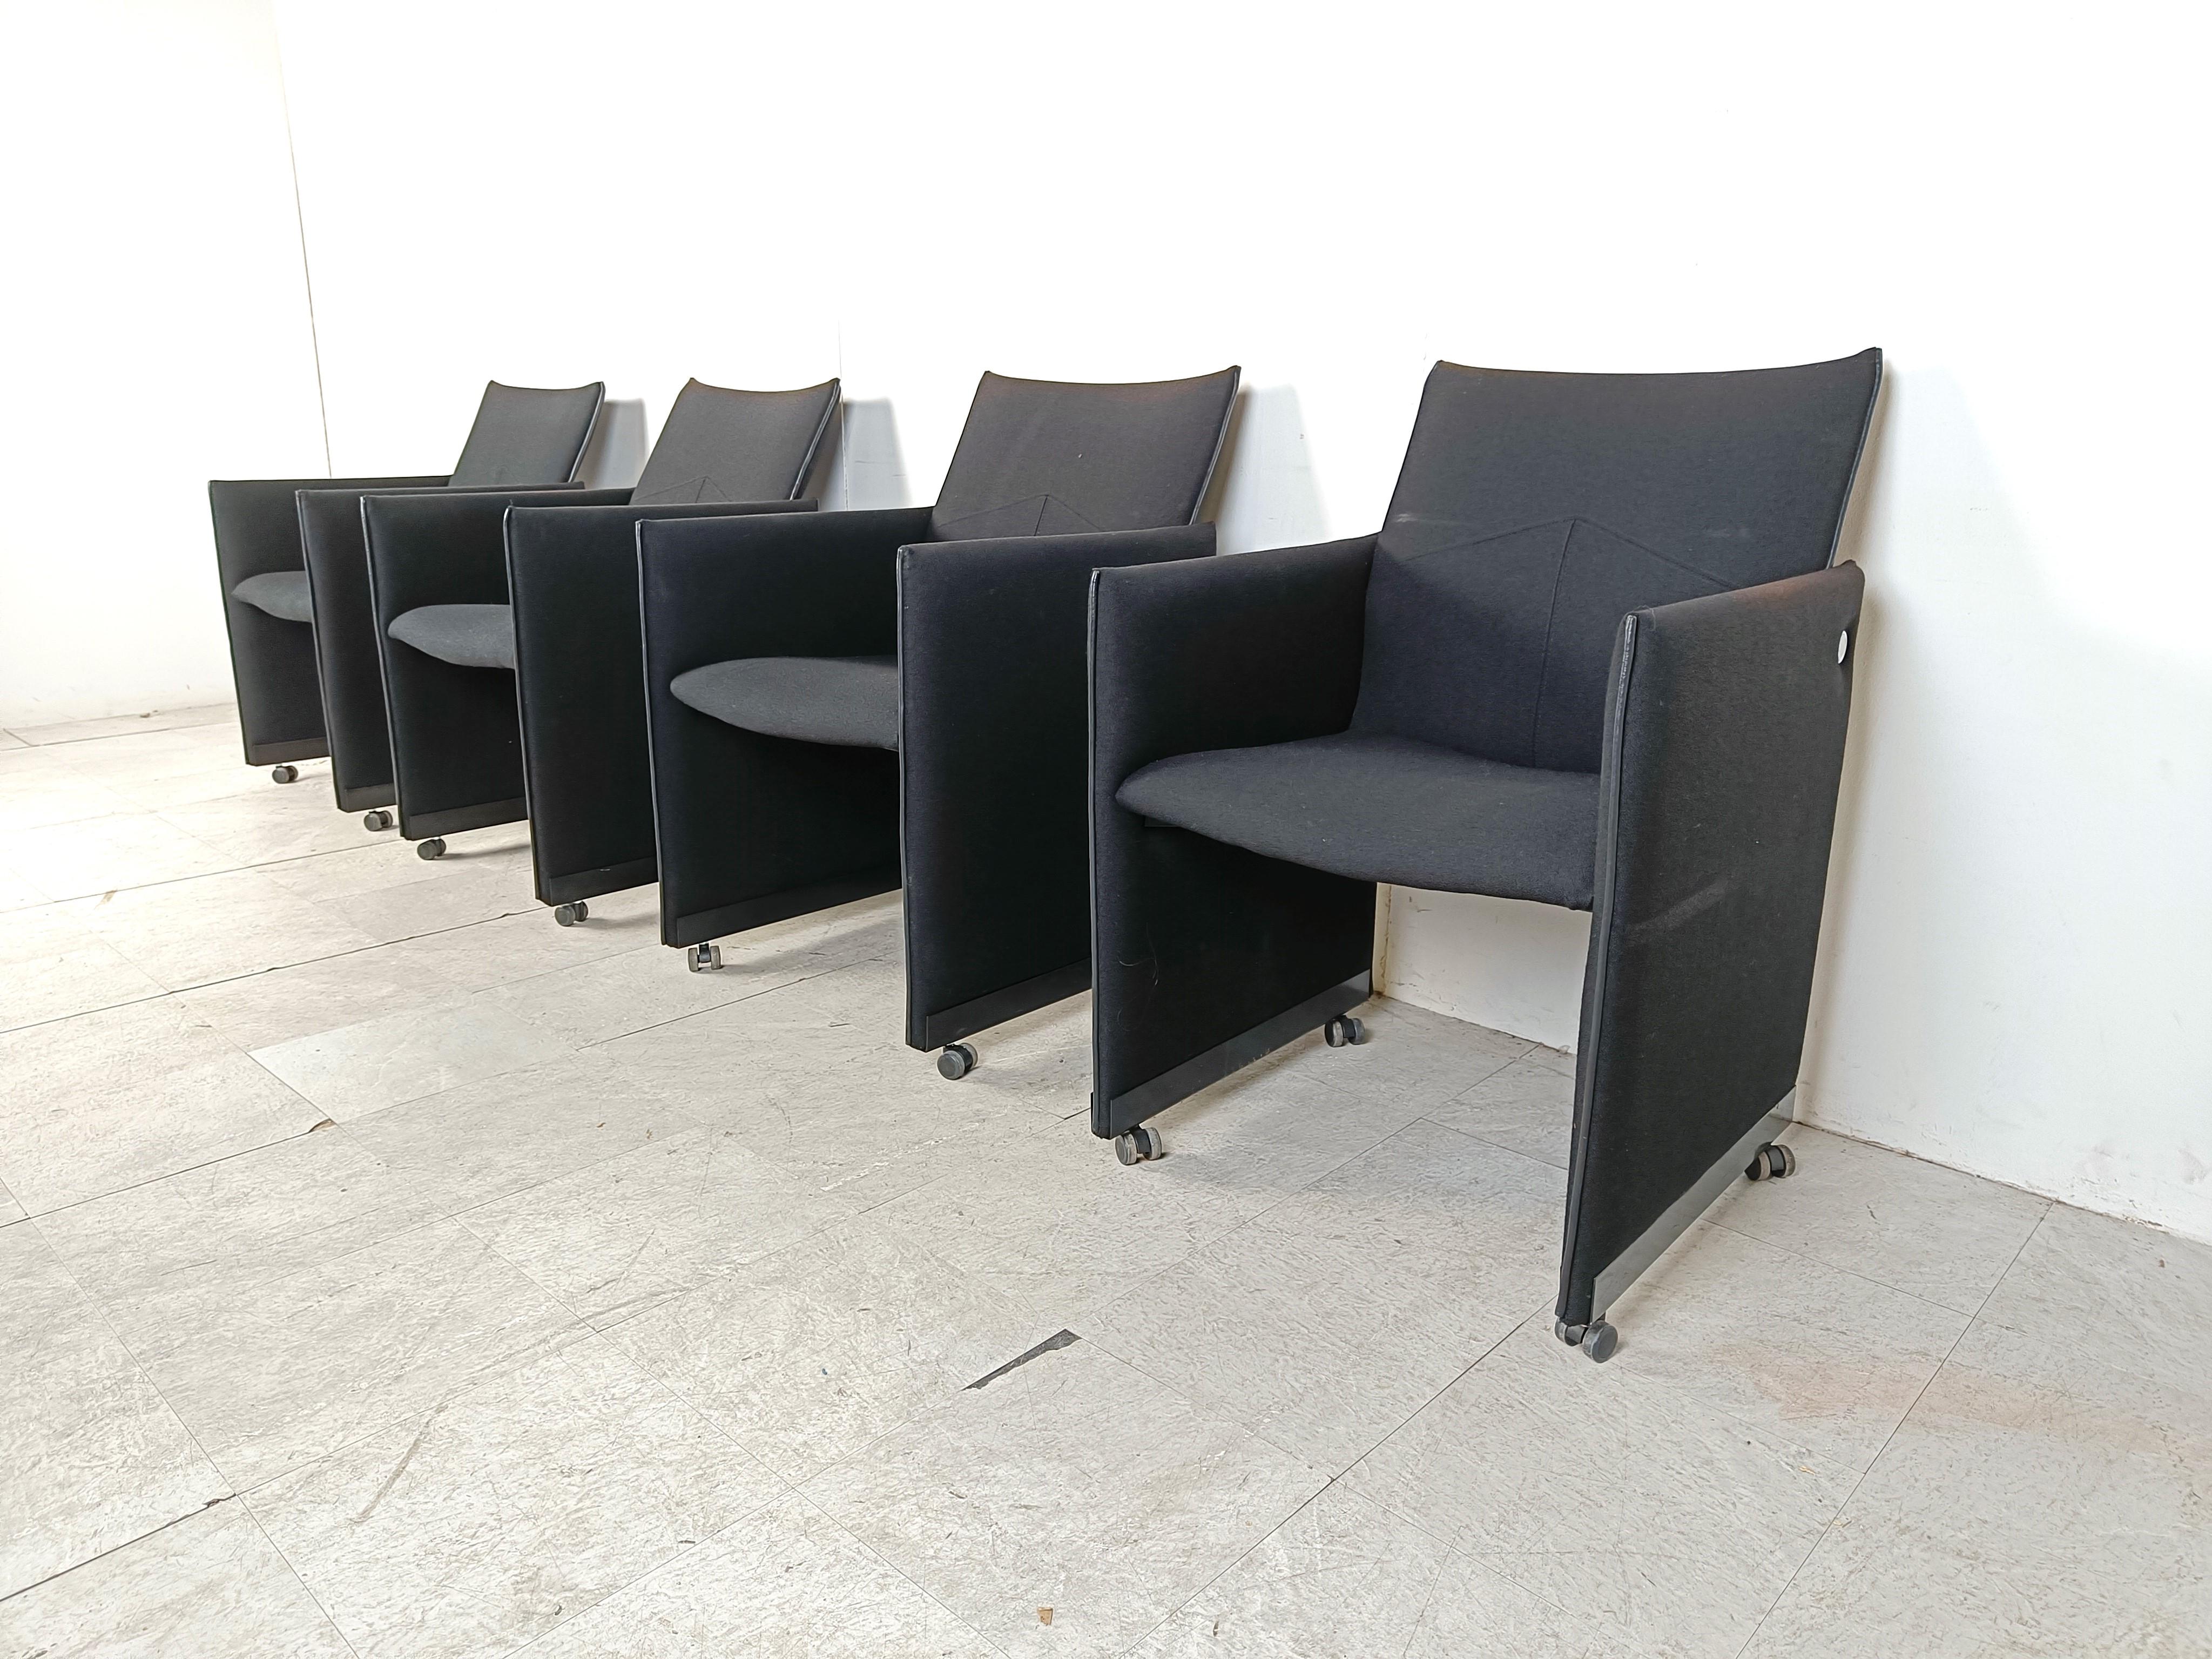 Montana armchairs by Geoffrey Harcourt for Artifort, 1990s - set of 4 In Good Condition For Sale In HEVERLEE, BE